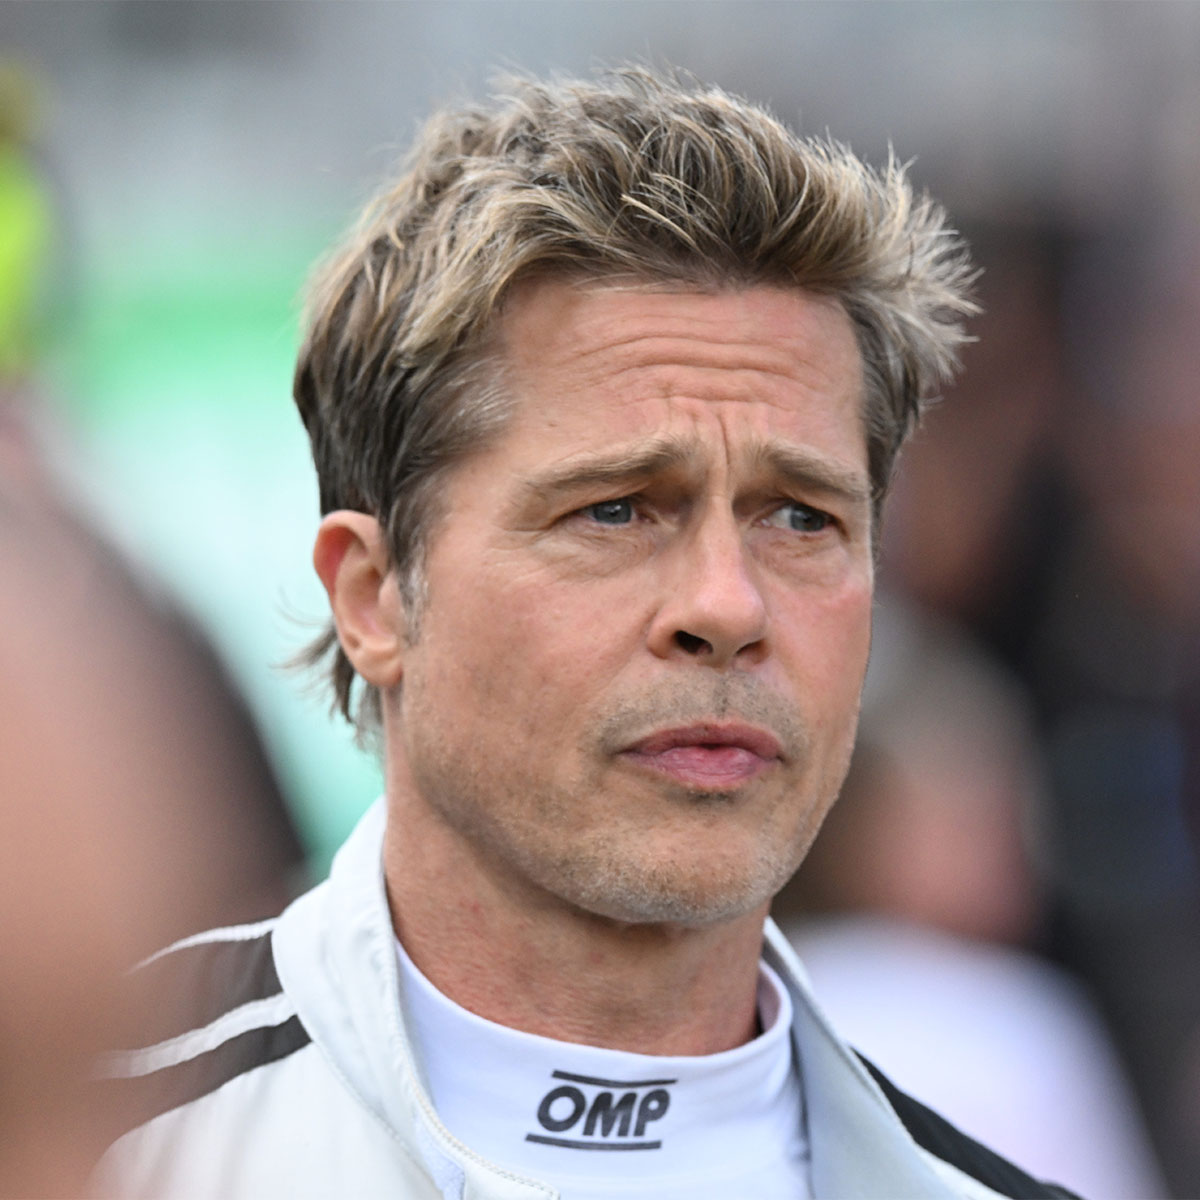 Brad Pitt's Son Says That He's An 'Awful Human Being' In Scathing Father's  Day Post Gone Viral - SHEfinds